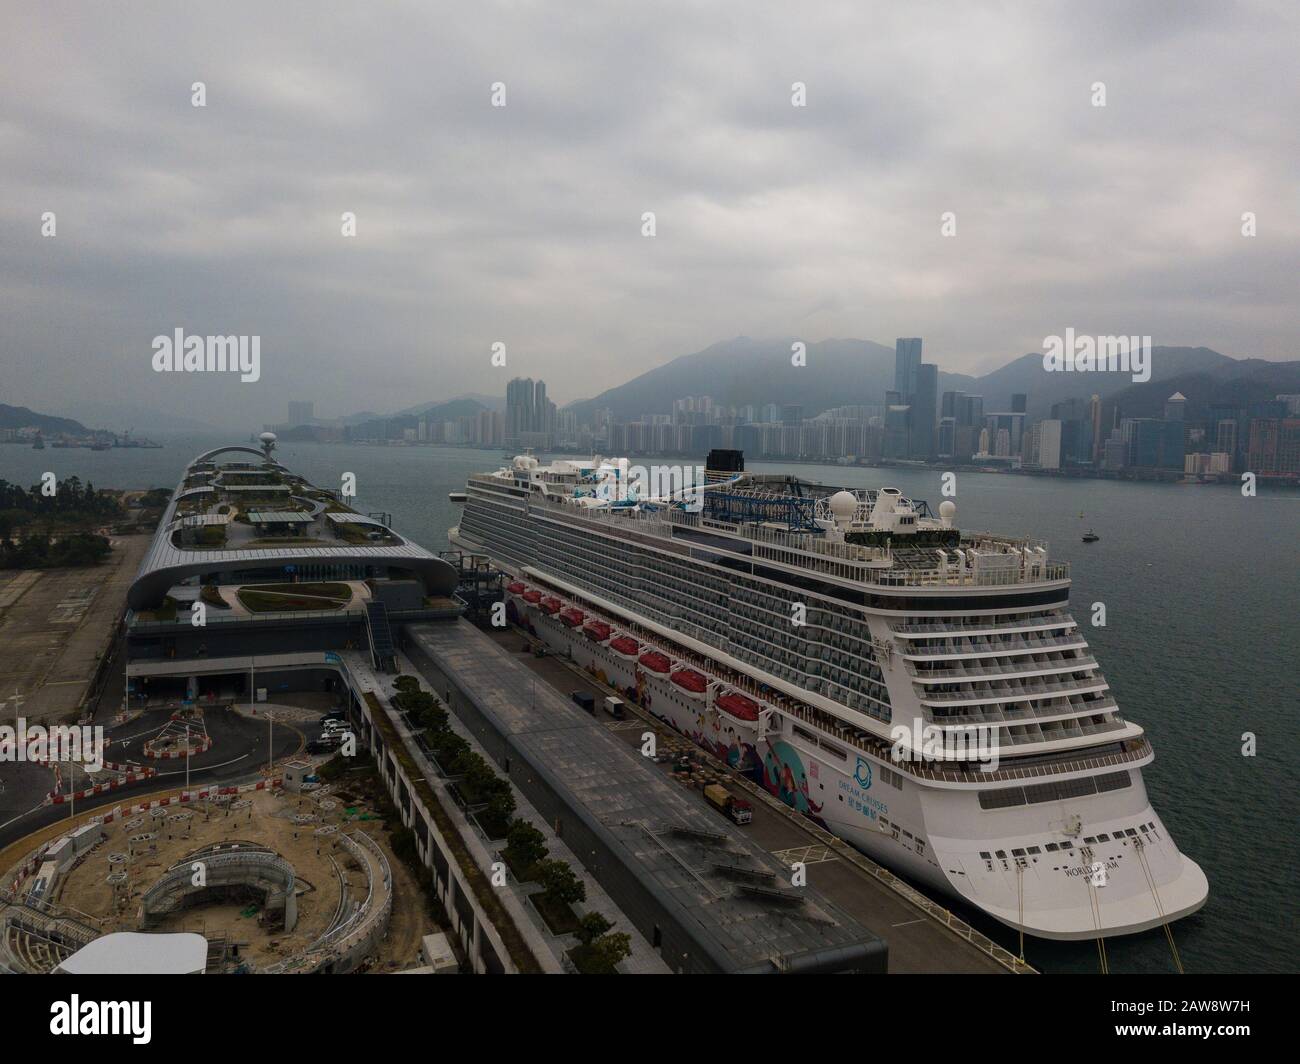 Hong Kong, China. 7th Feb, 2020. The cruise ship 'World Dream' is seen moored at the Kai Tak Cruise Terminal in Hong Kong in this drone view., The cruise ship is kept quarantined in Hong Kong after passengers were found infected by the Wuhan coronavirus. s Credit: Visions of Asia/Alamy Live News Stock Photo